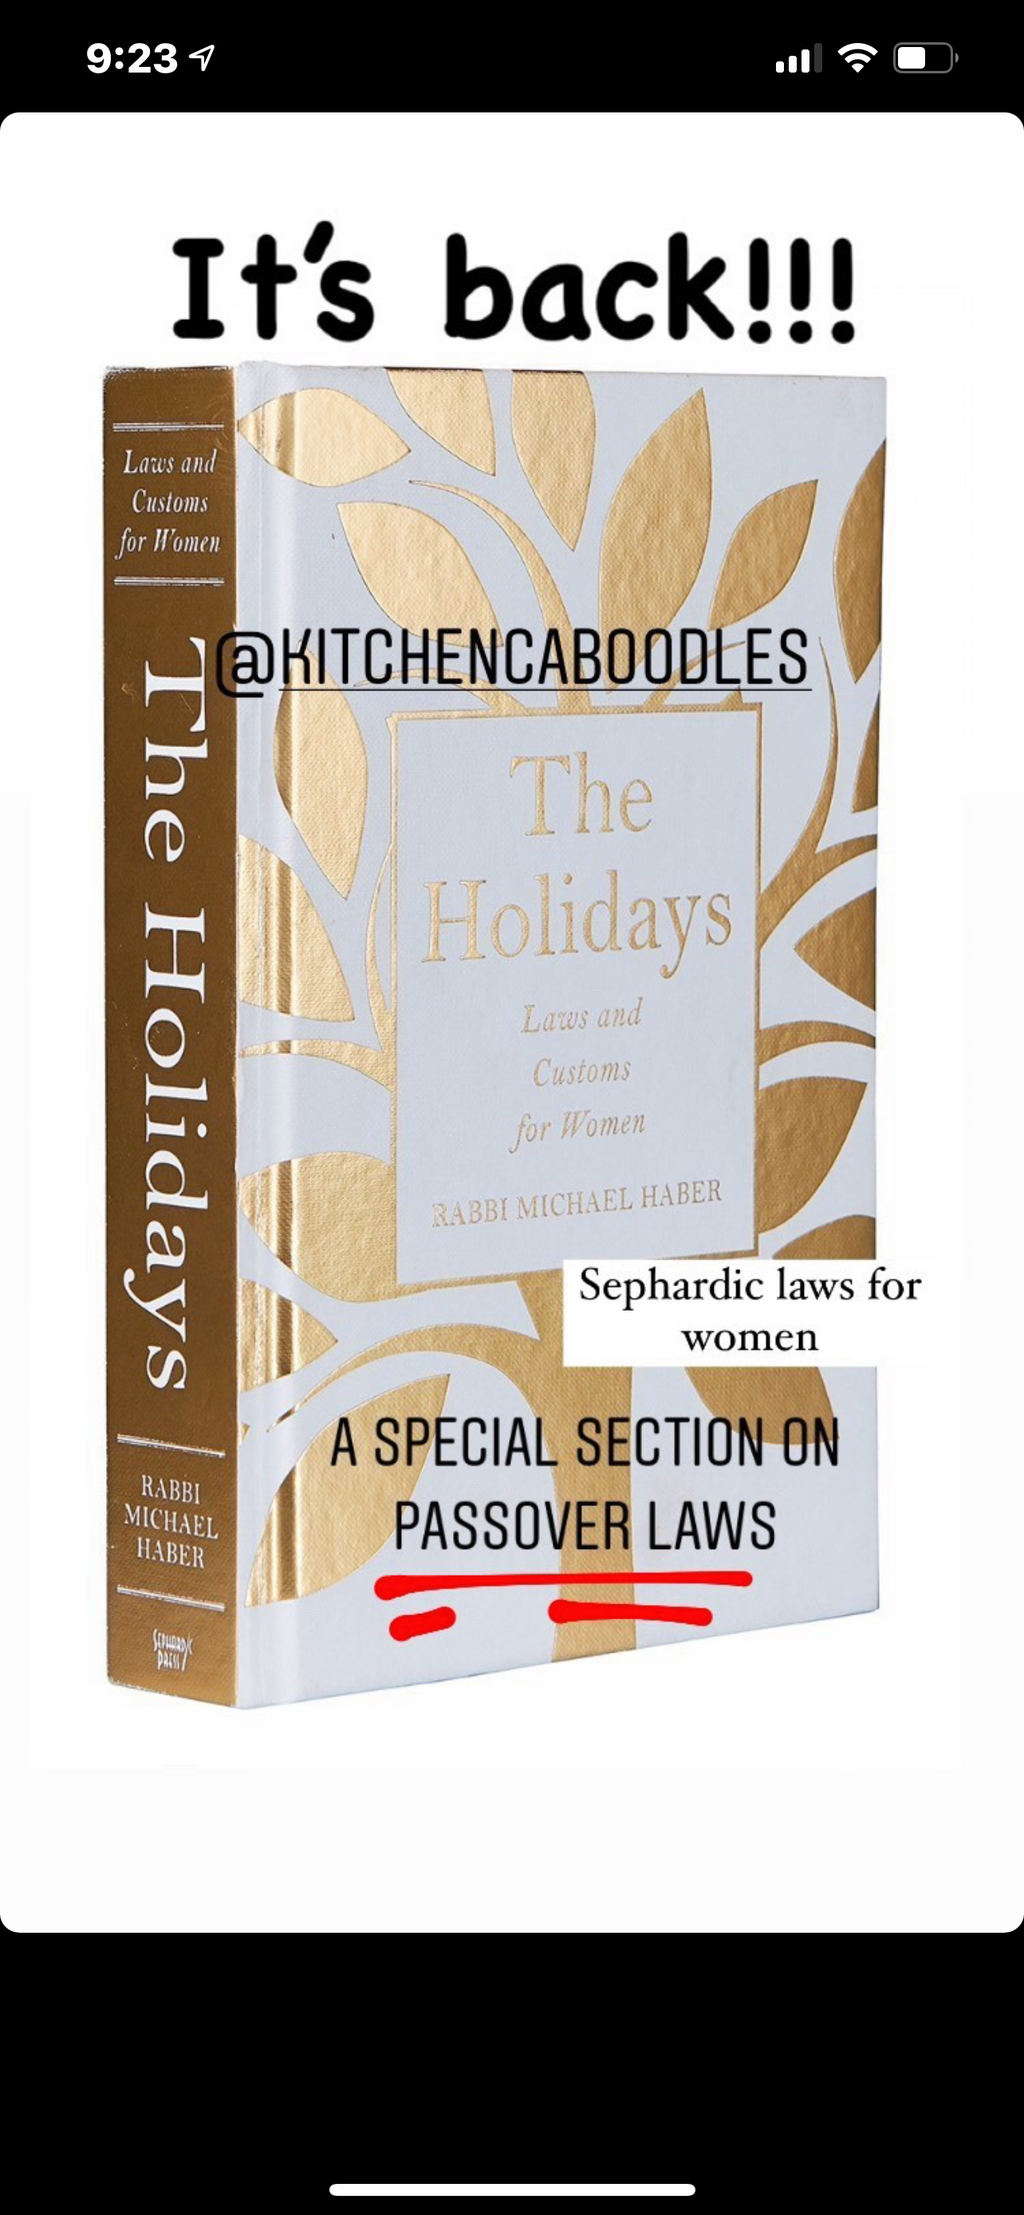 The holidays book by Rabbi Haber